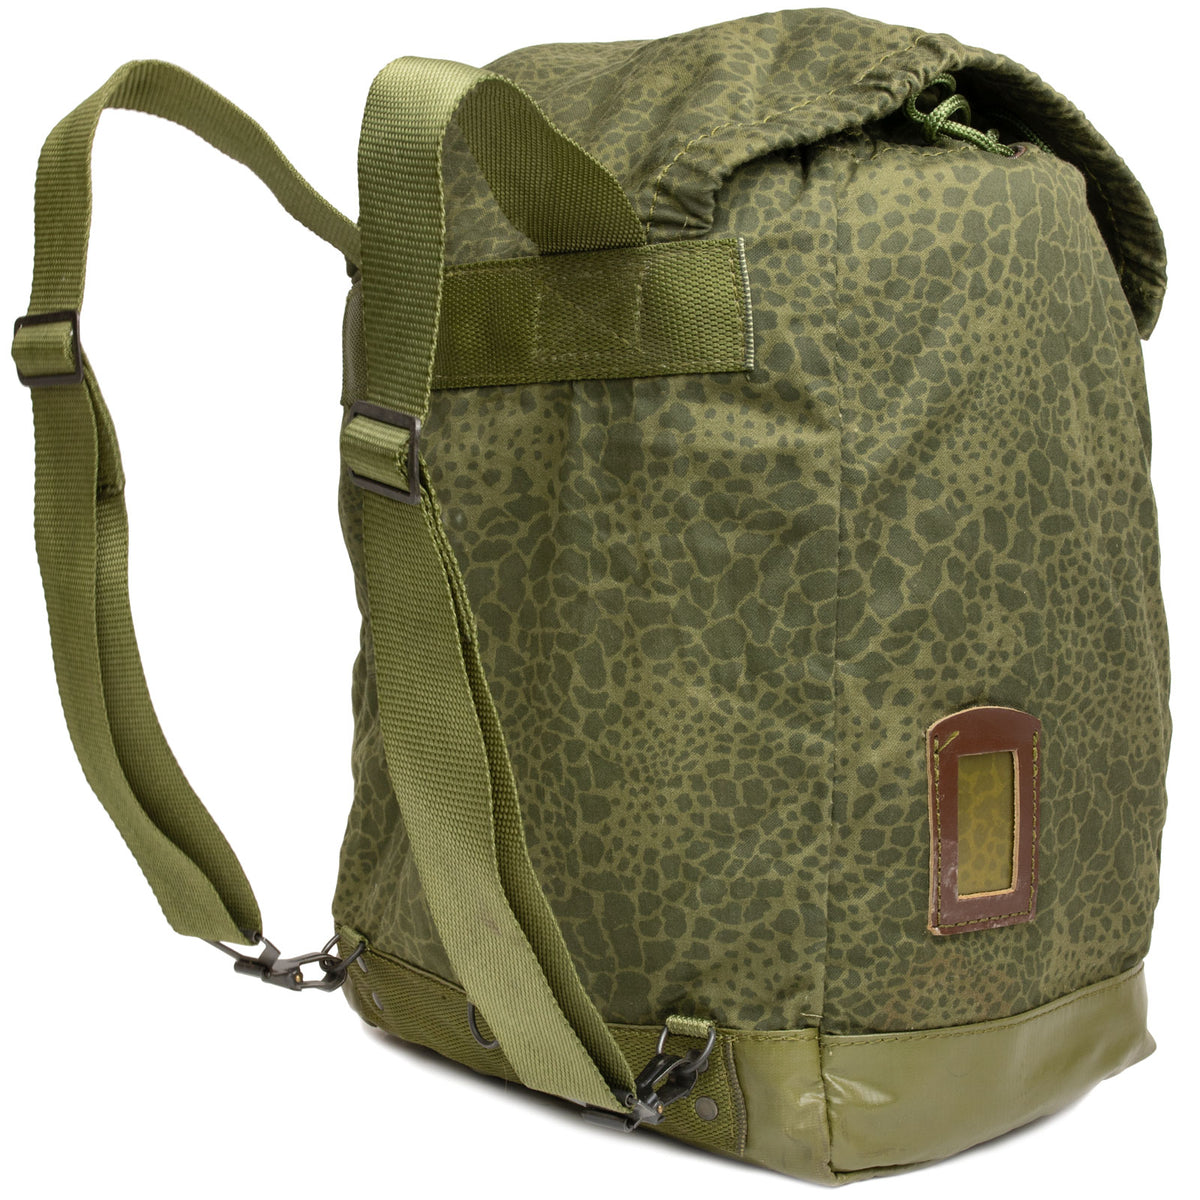 Polish Army Leopard Camo Backpack Straps